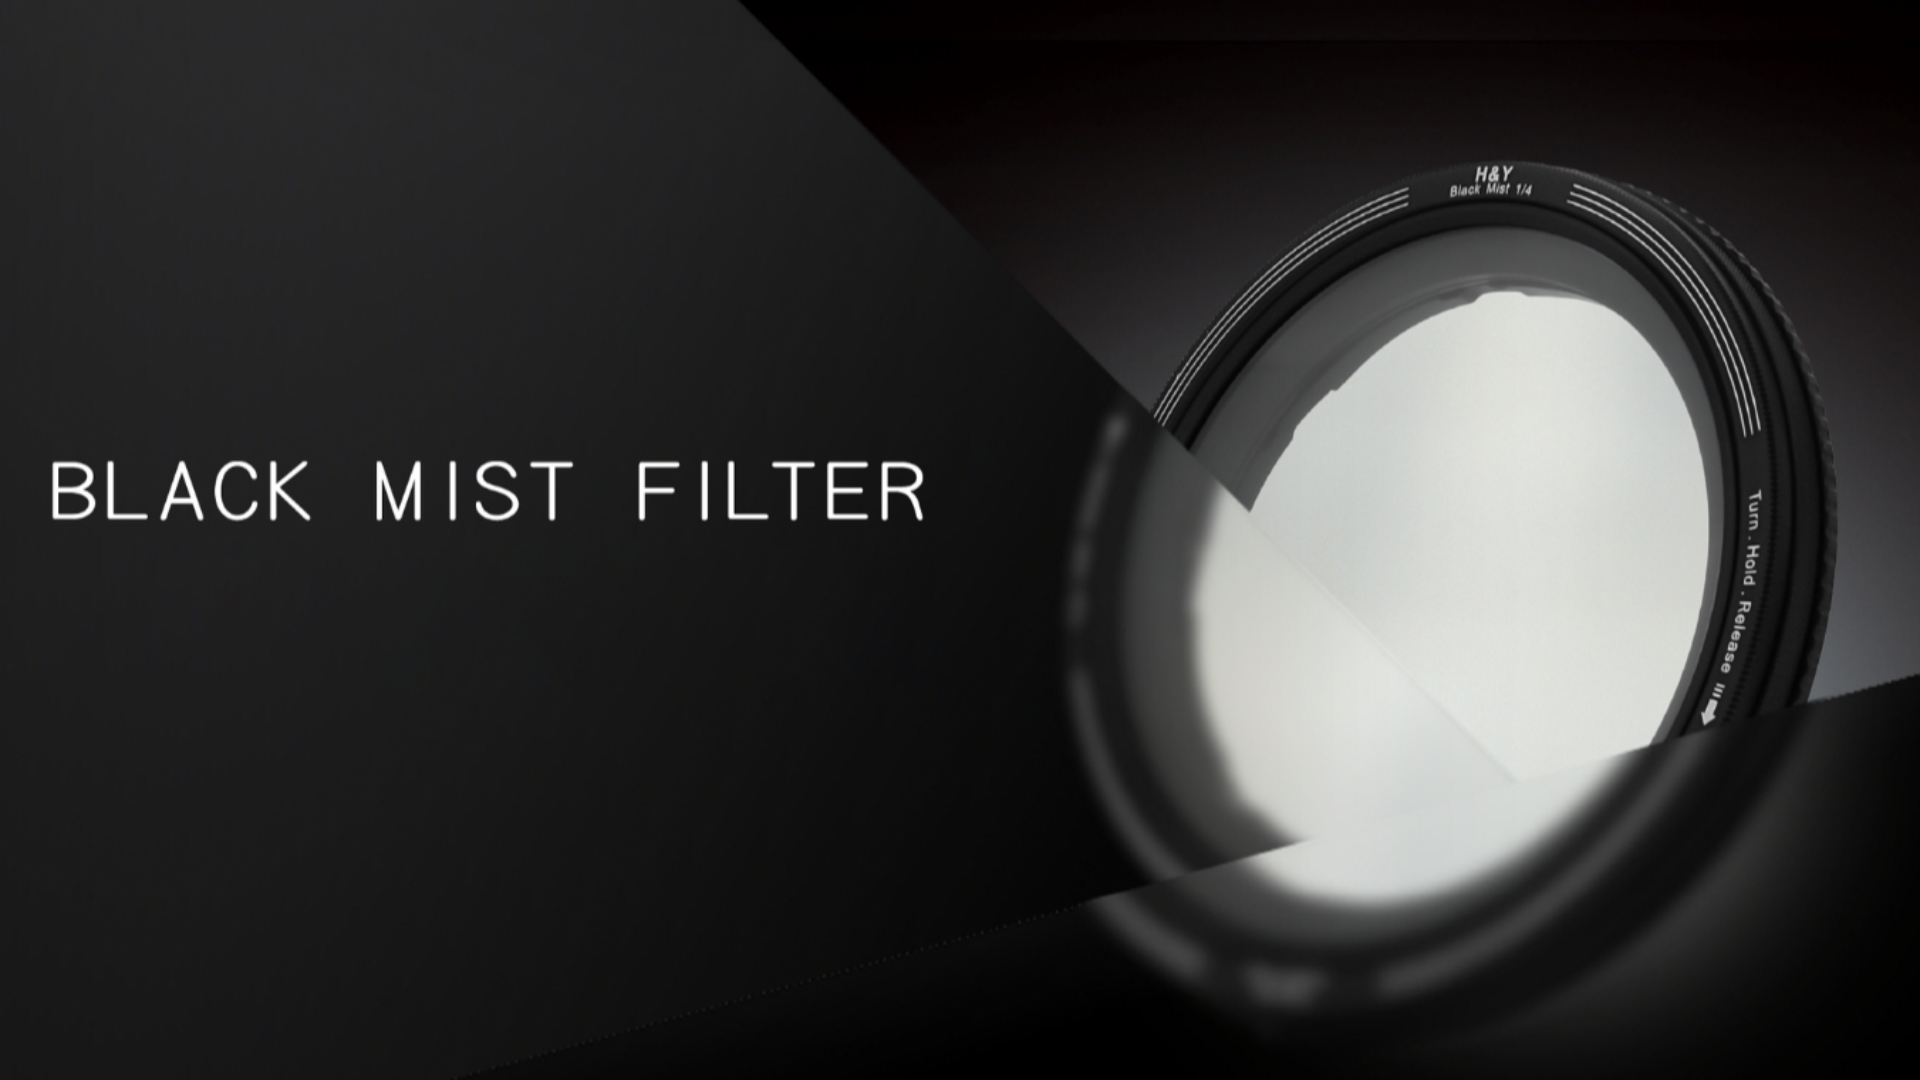 H&Y REVORING Black Mist Filter and Attachments Released | CineD